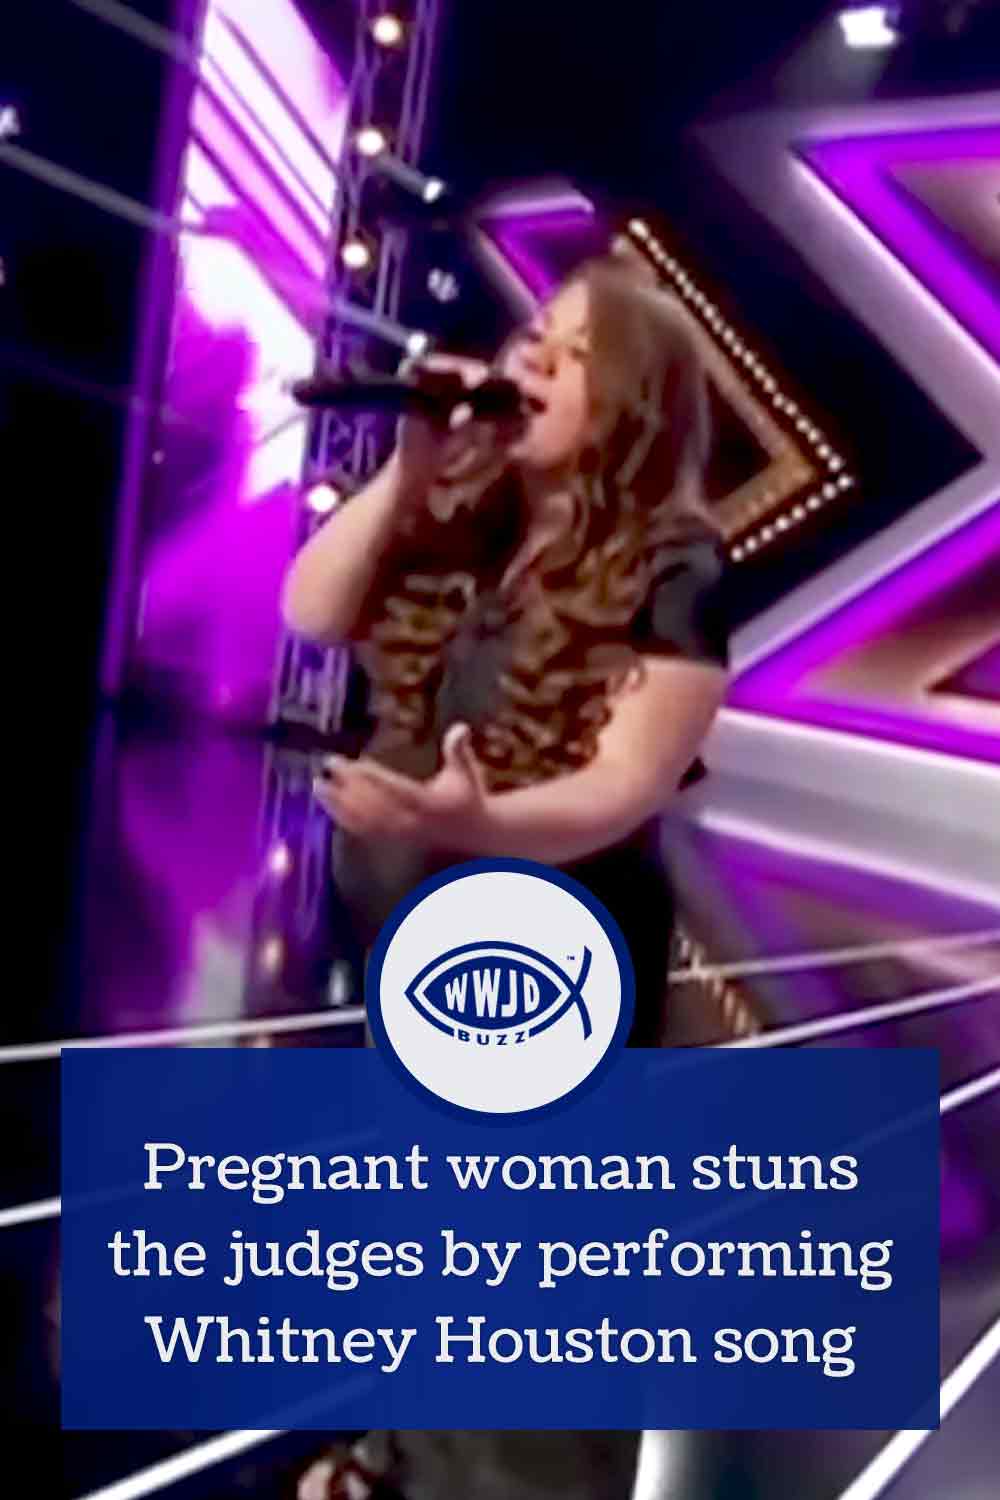 Pregnant woman stuns the judges by performing Whitney Houston song